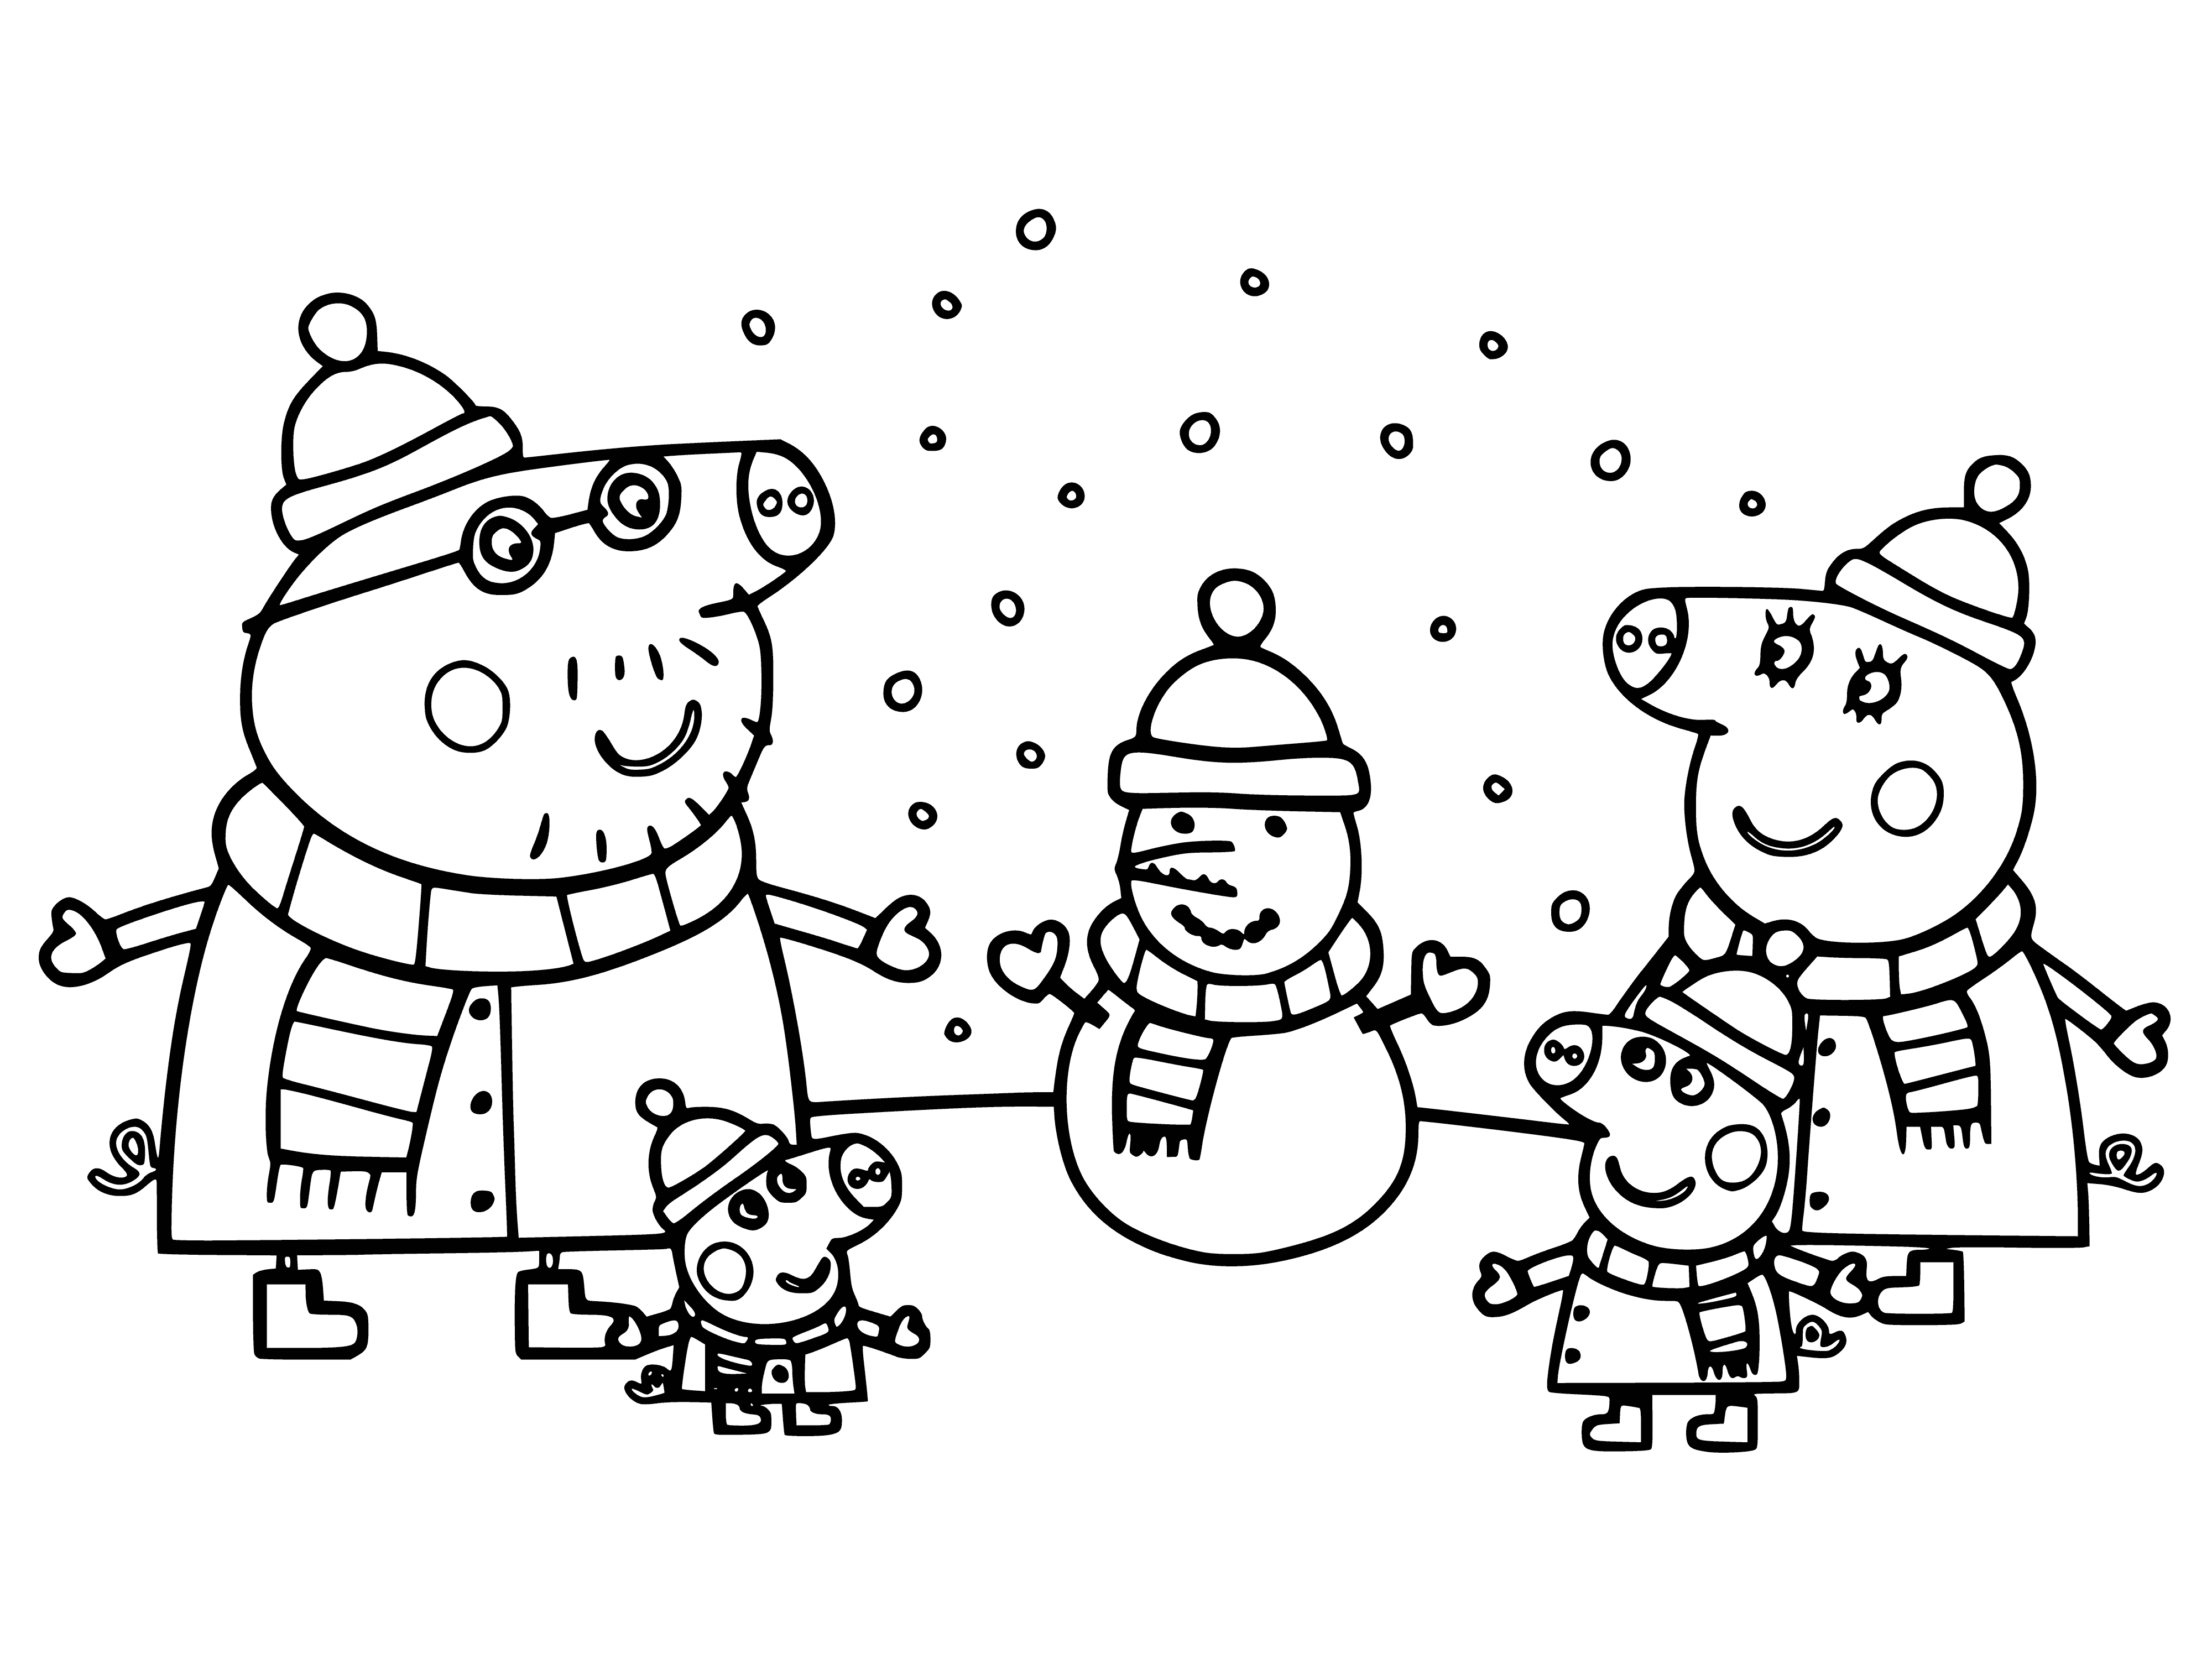 A family of pigs makes a snowman coloring page